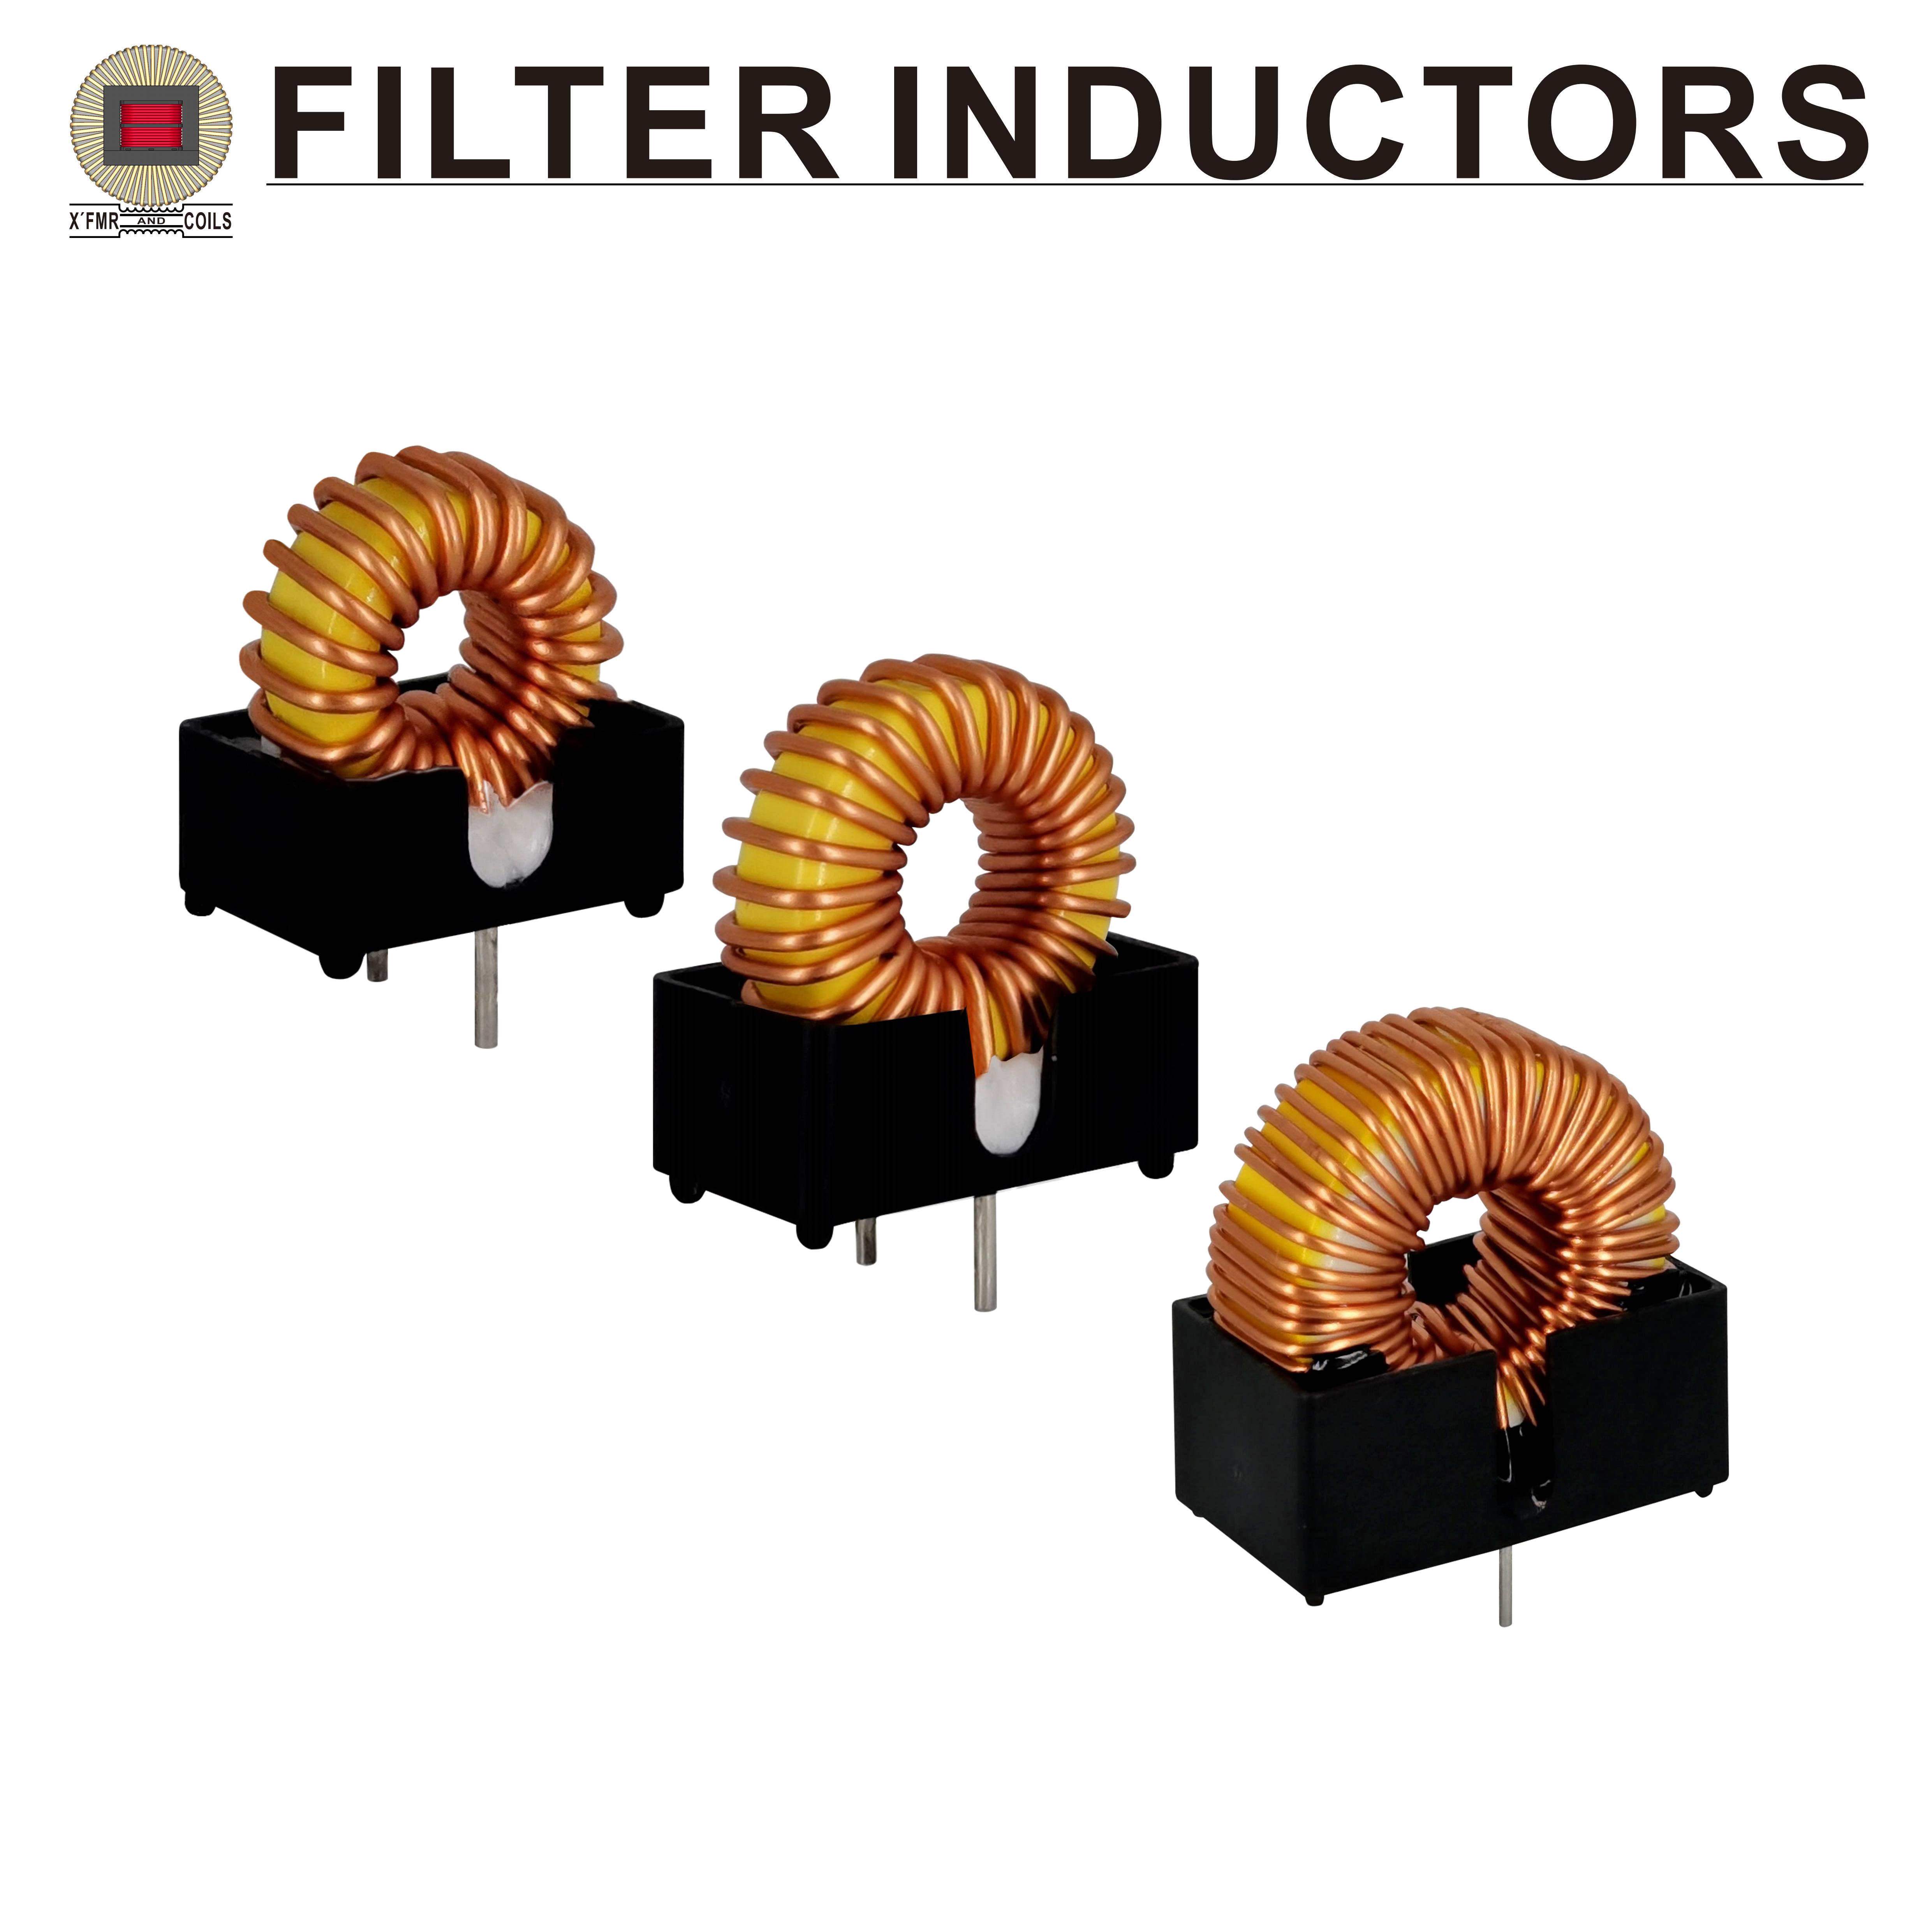 Filter Inductors FI-05 Series